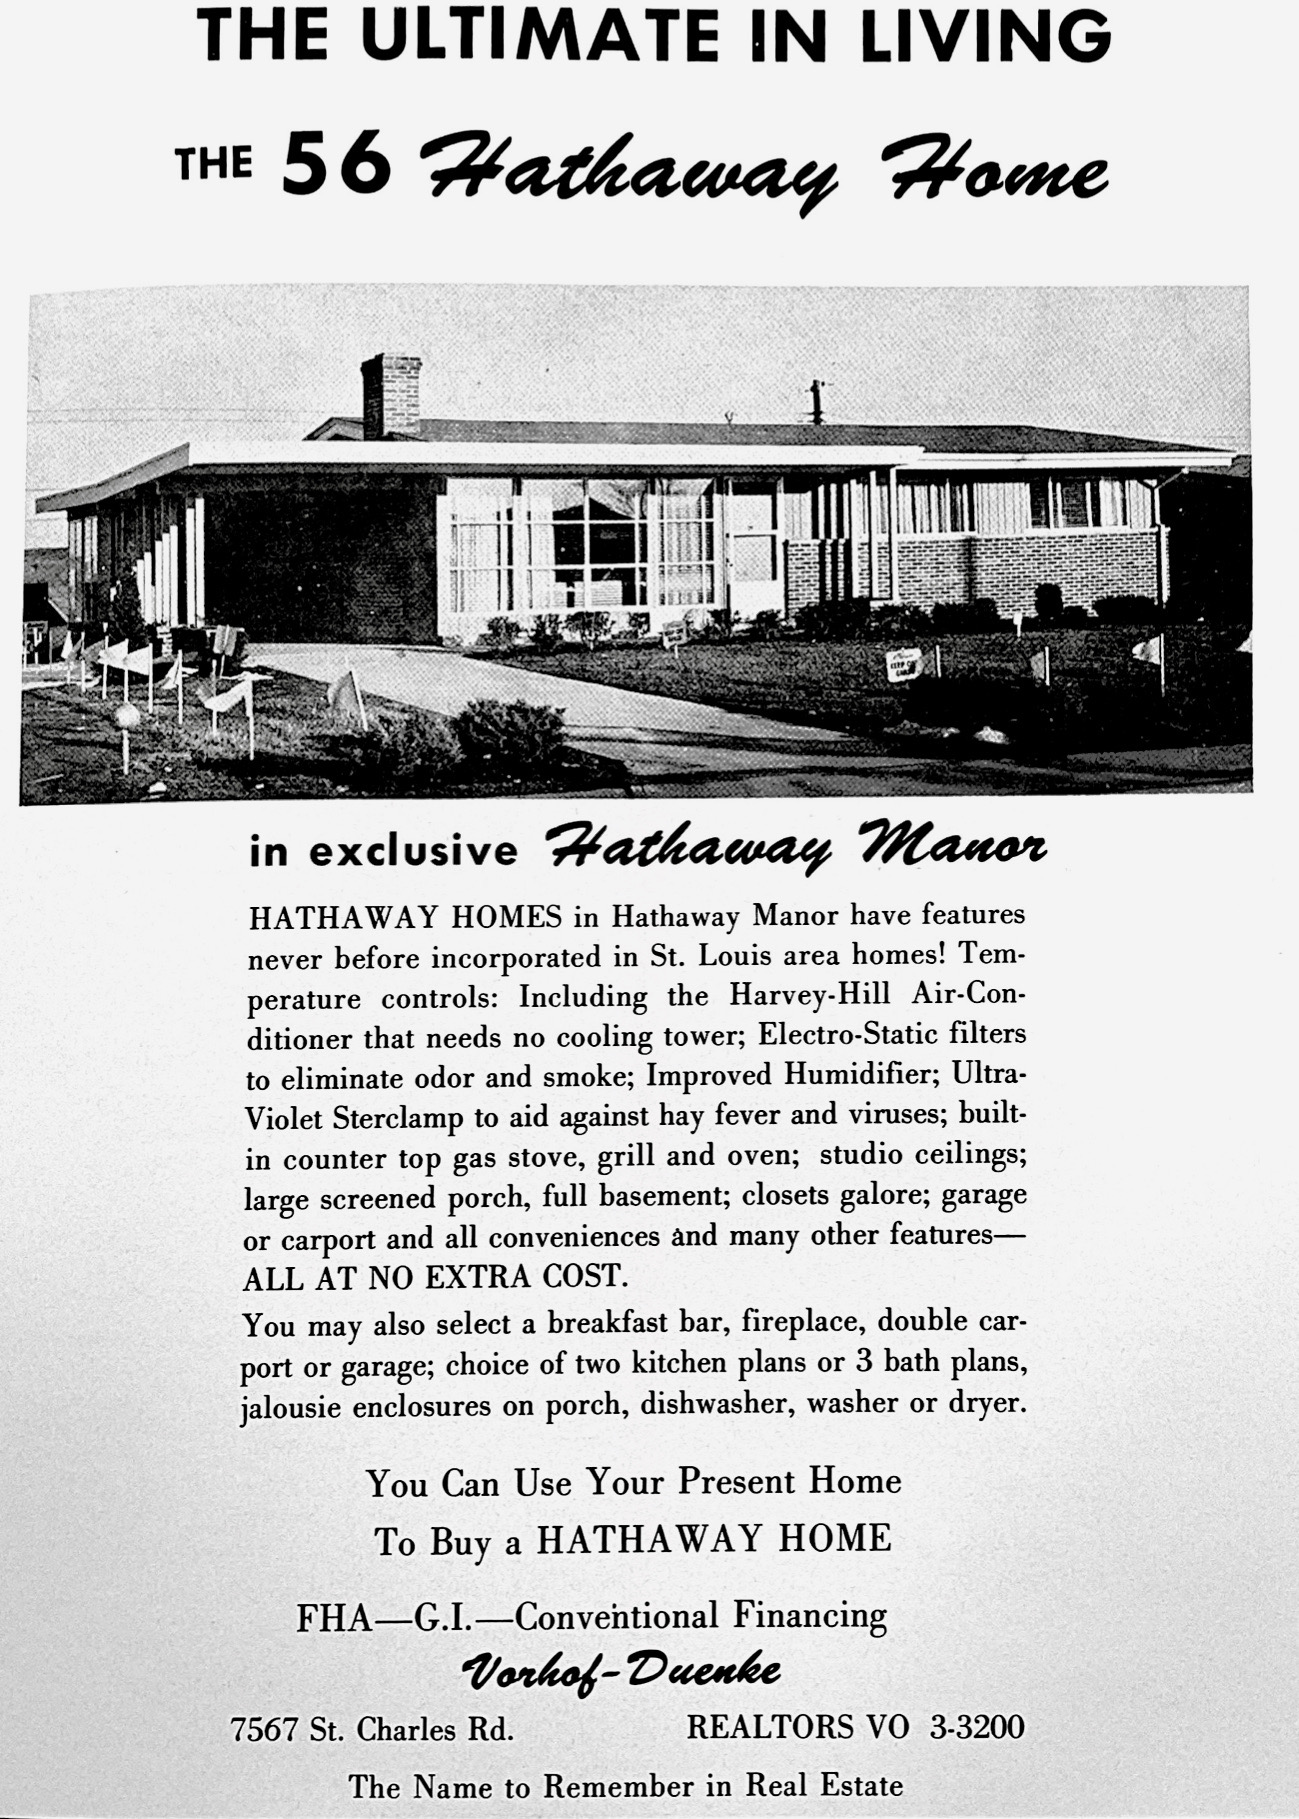 THE 56 HATHAWAY HOME. The ad appeared in ECHOES 1956. 